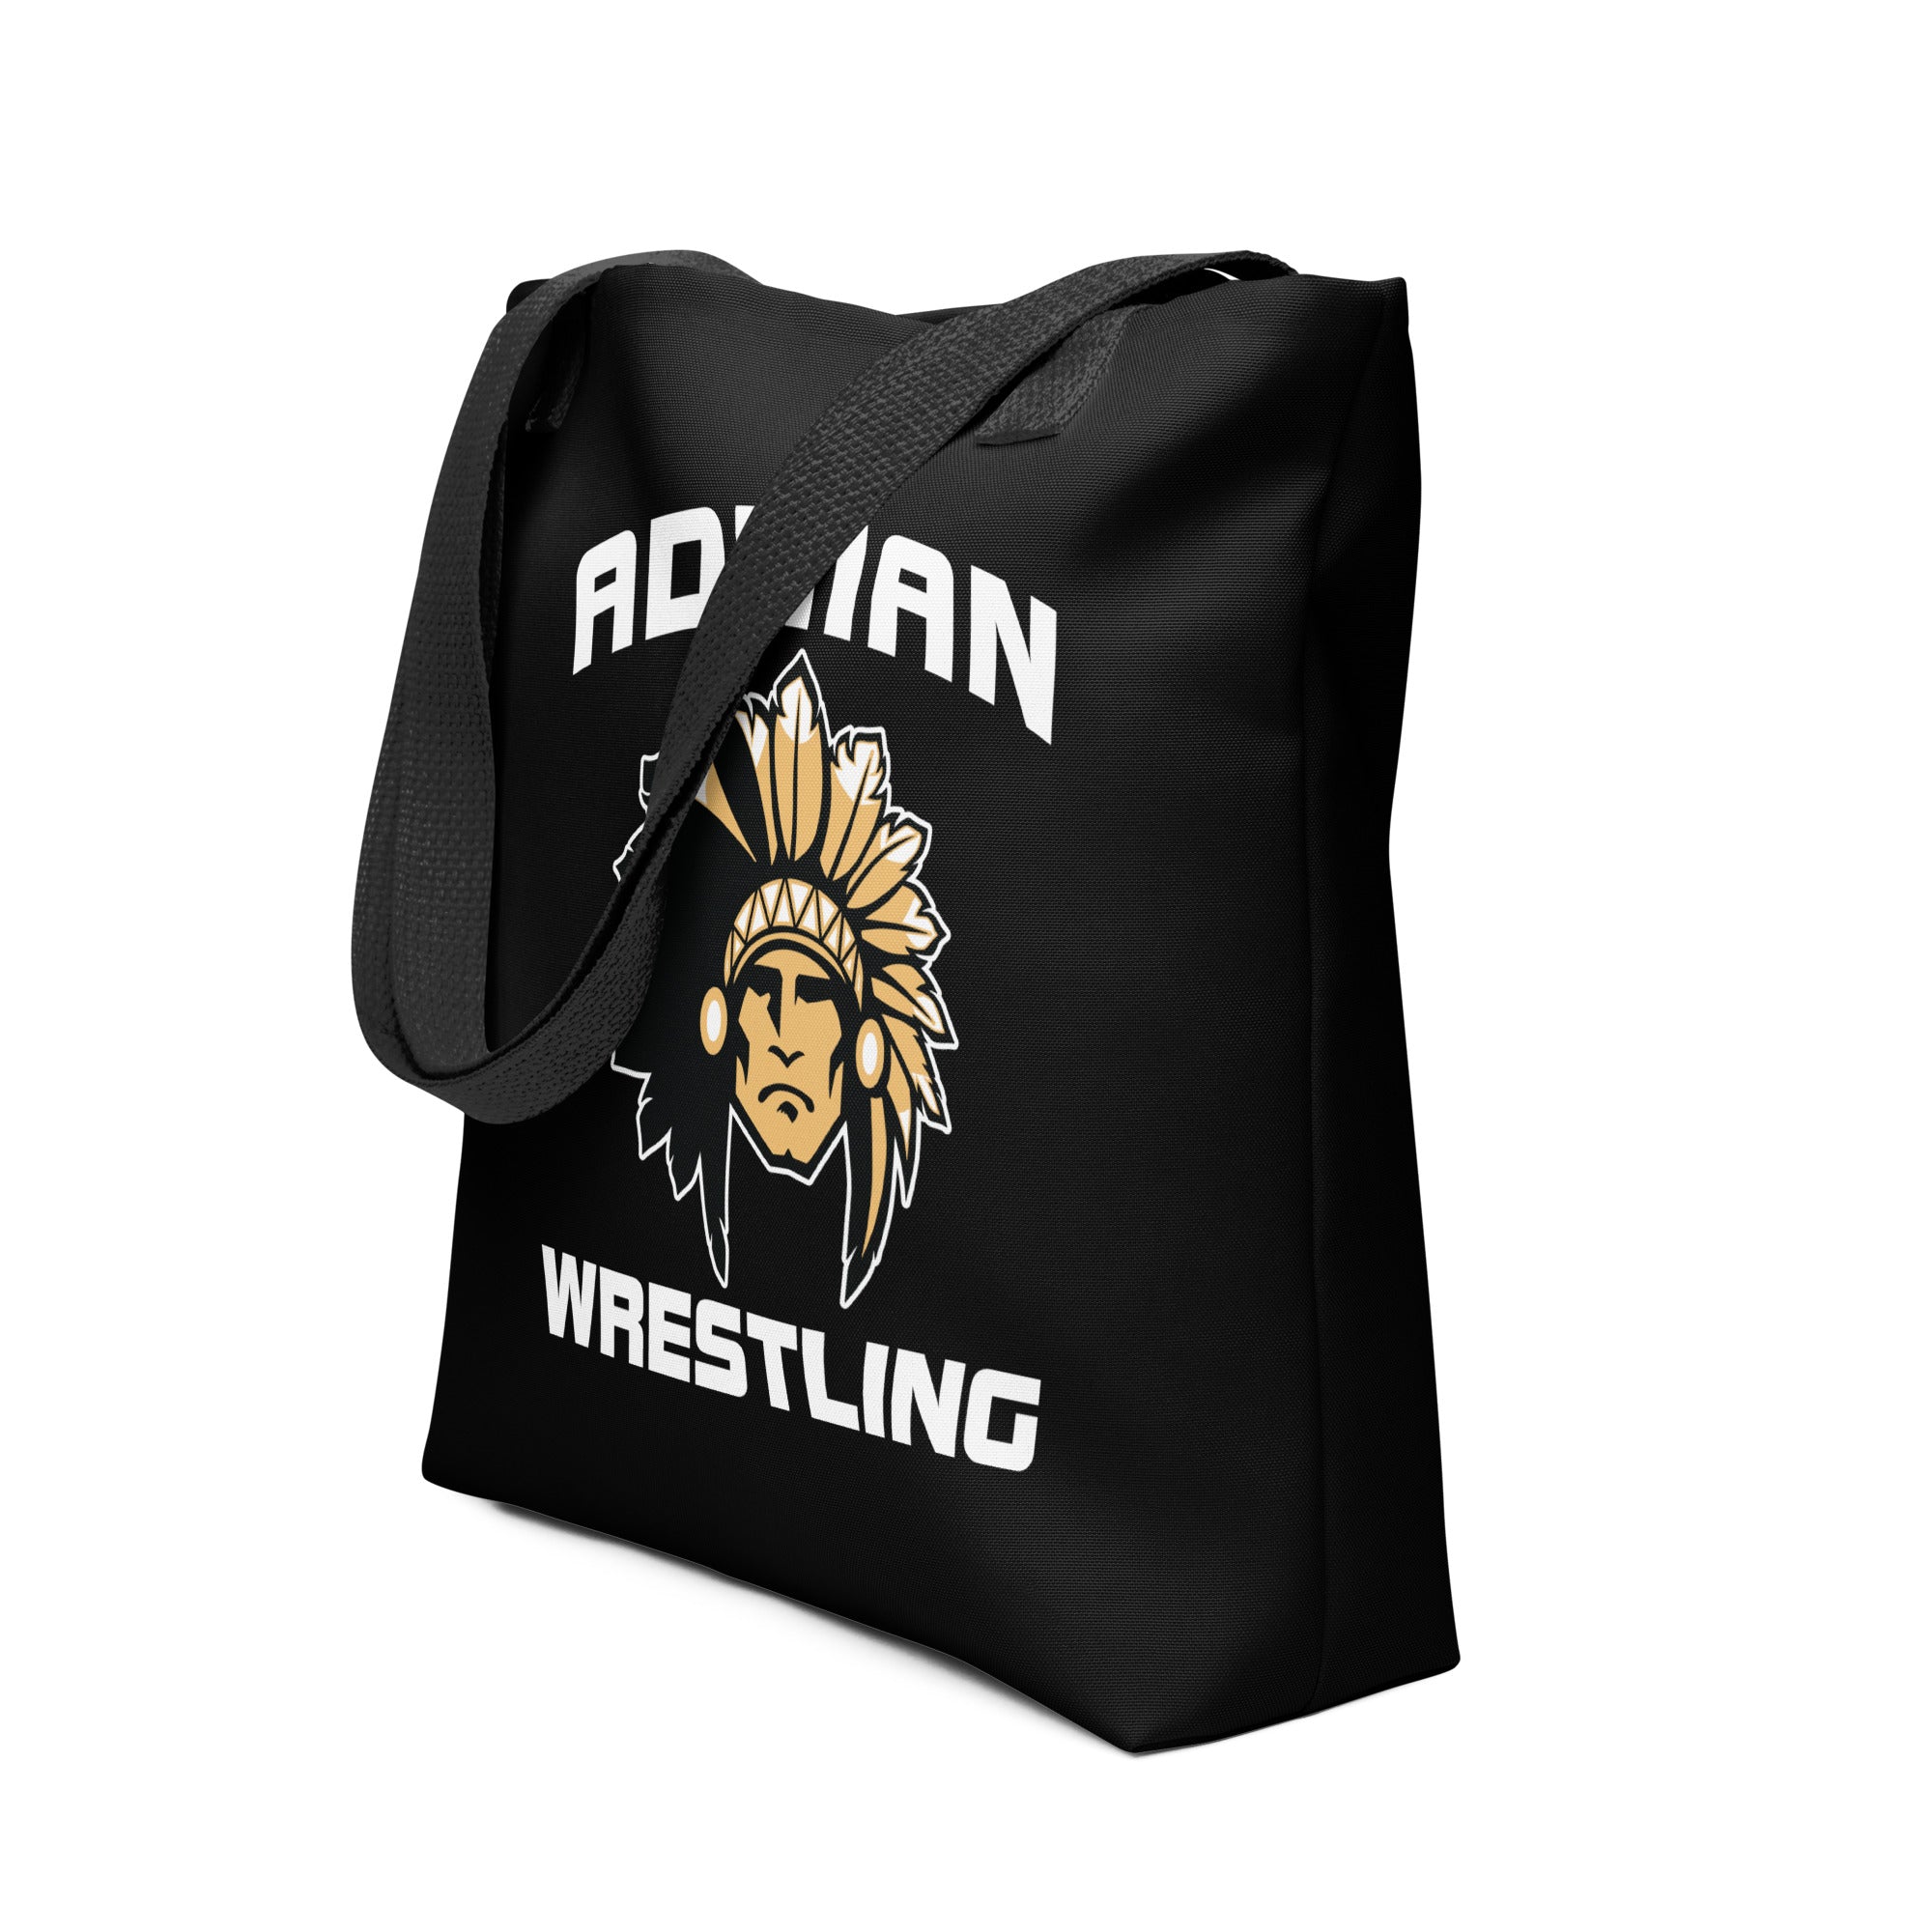 Adrian Wrestling All Over Print Tote